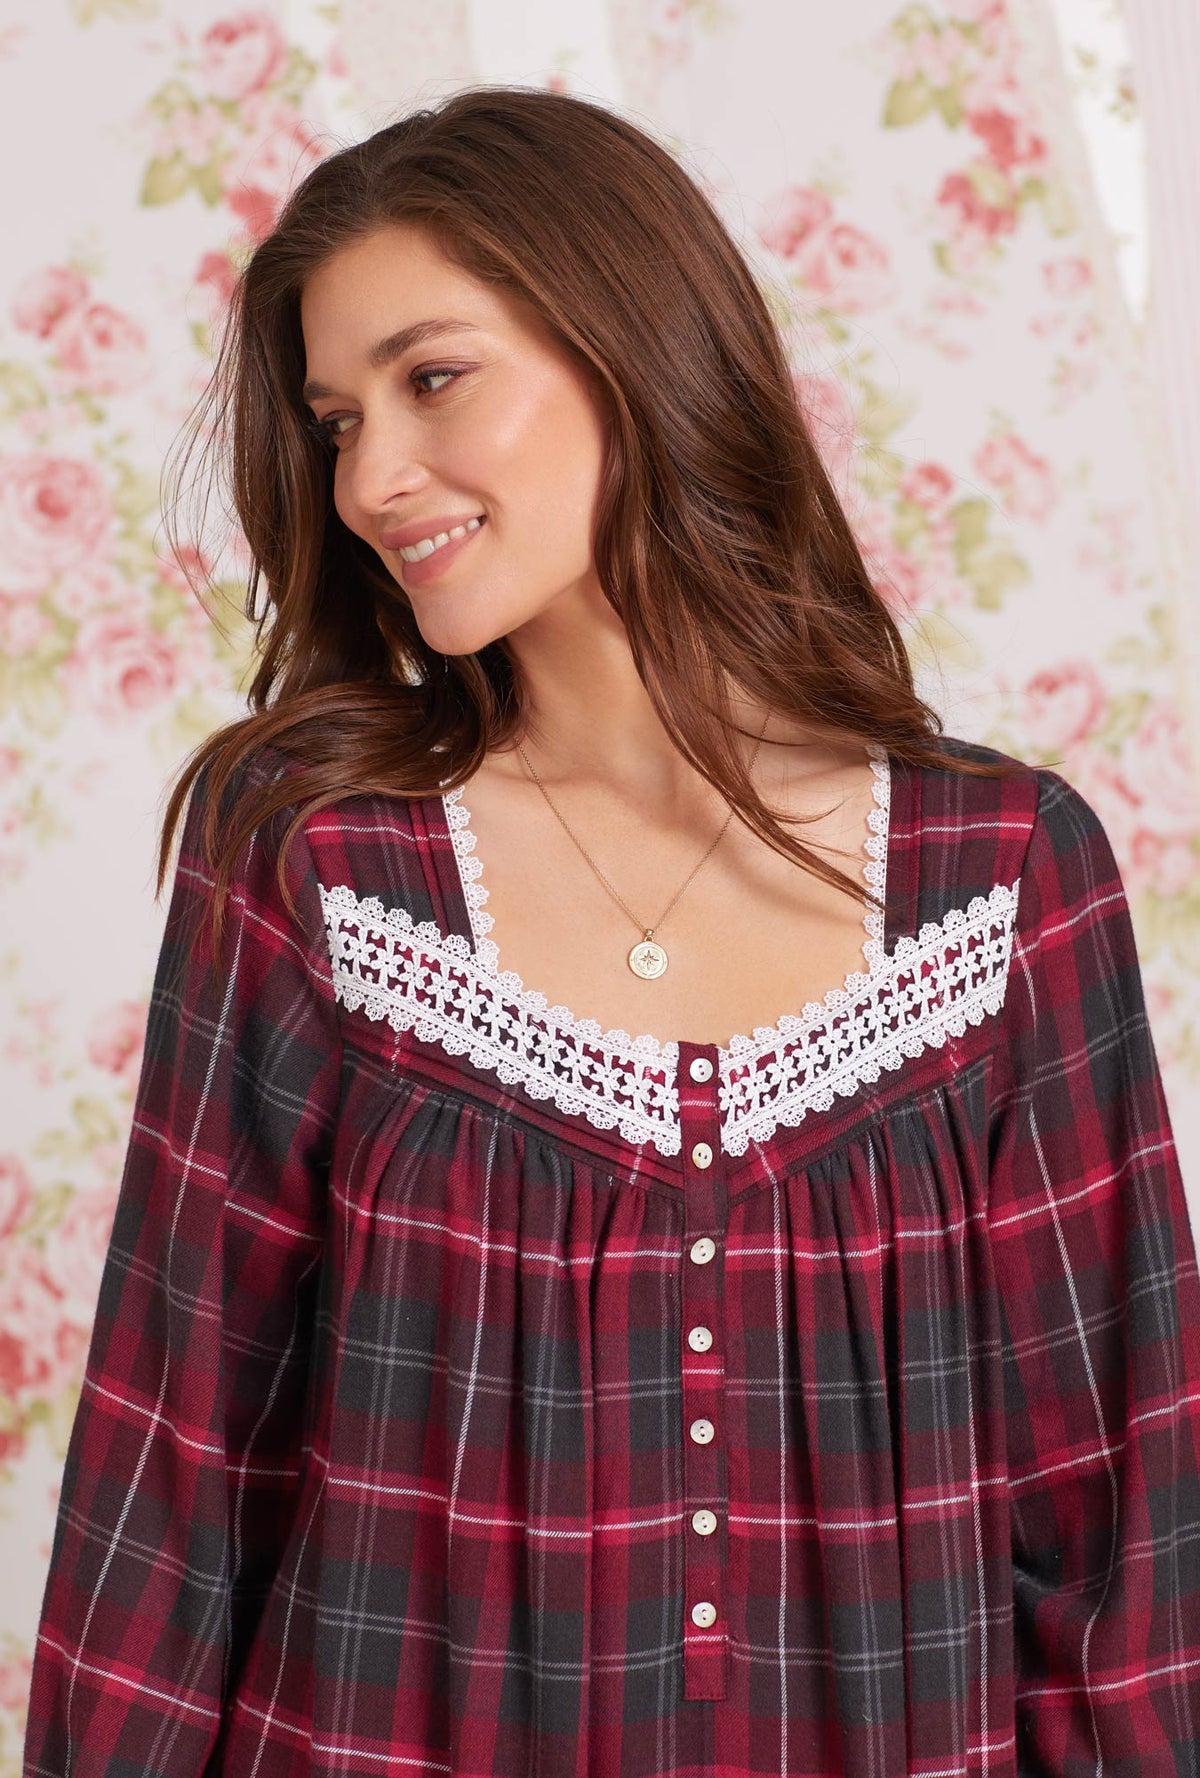 A lady wearing red Cotton Flannel Long Sleeve Nightgown with Berry Plaid print